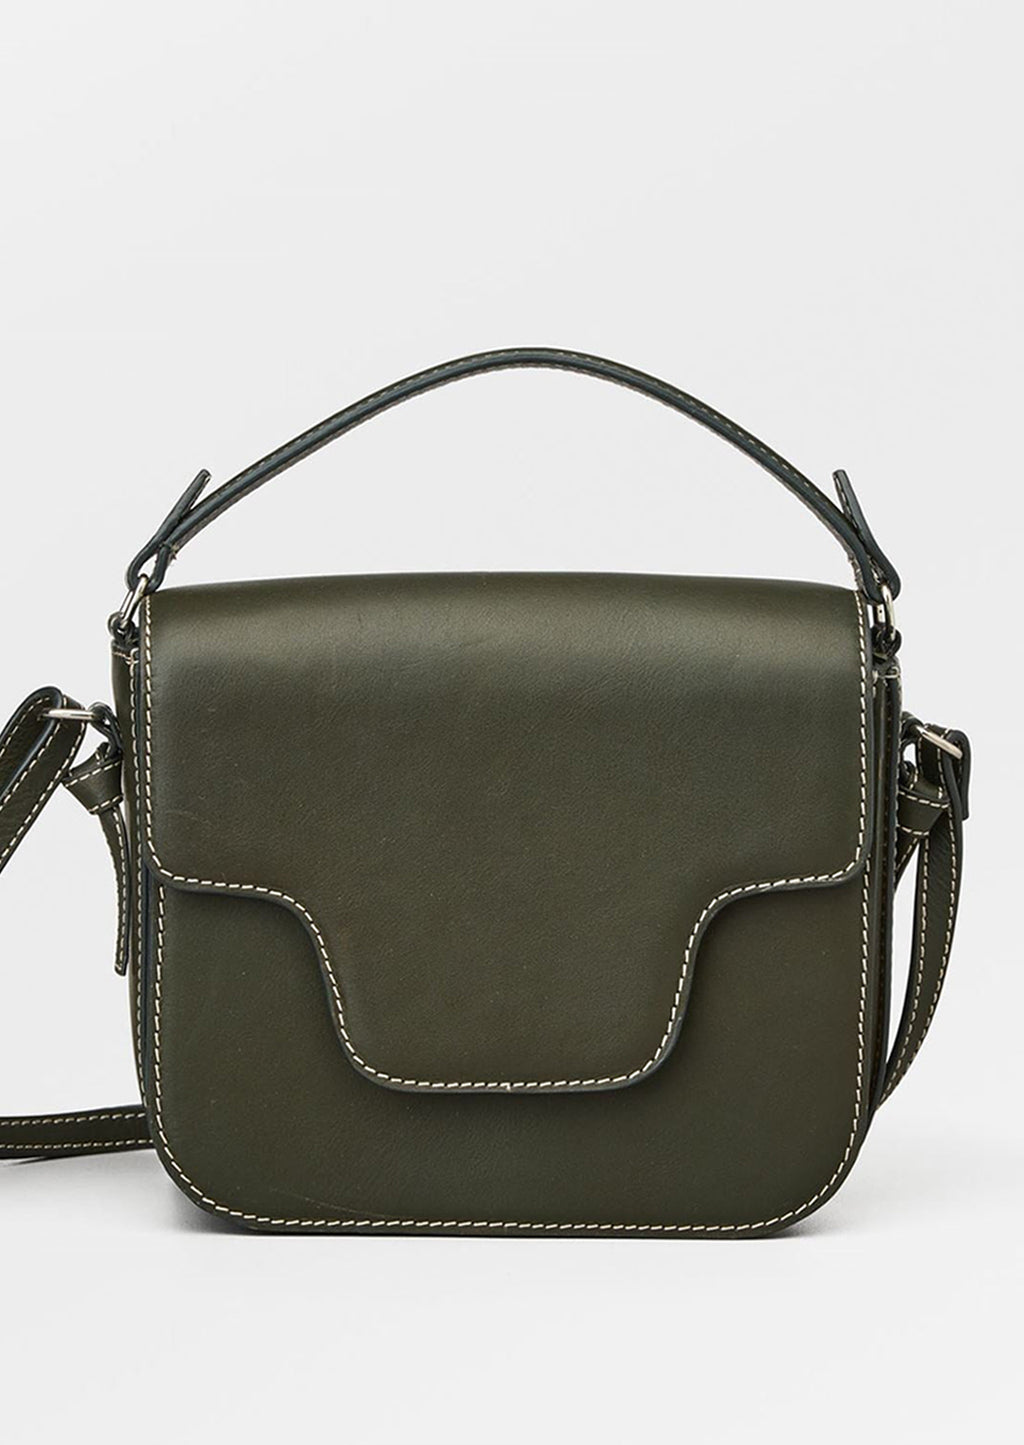 Khaki: A leather handbag in khaki green with white contrast stitching and flap front design.